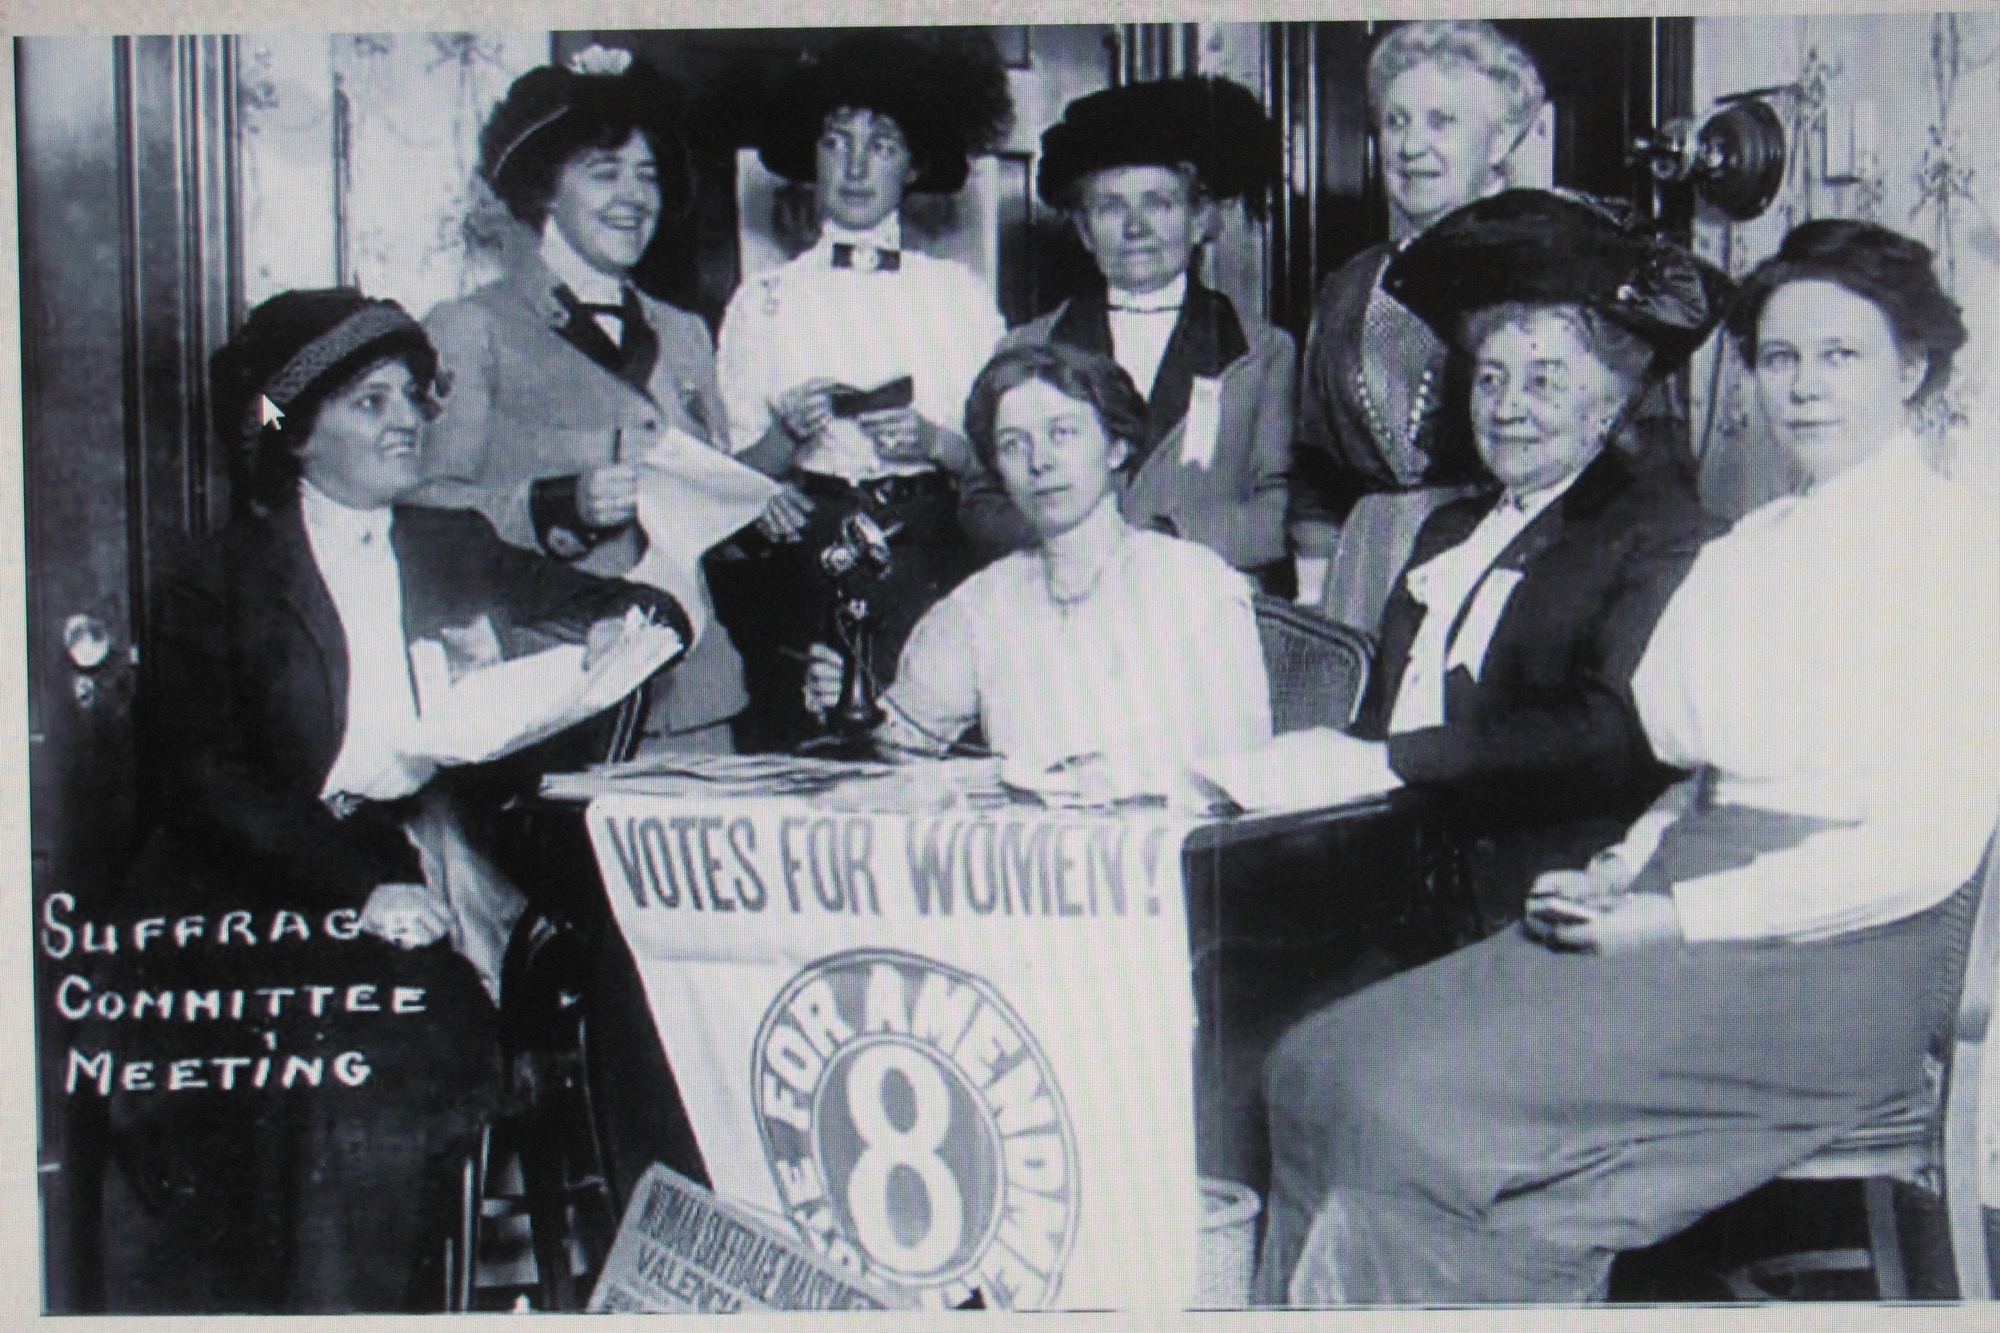 Women across America formed suffrage groups and lobbied for the right to vote.  